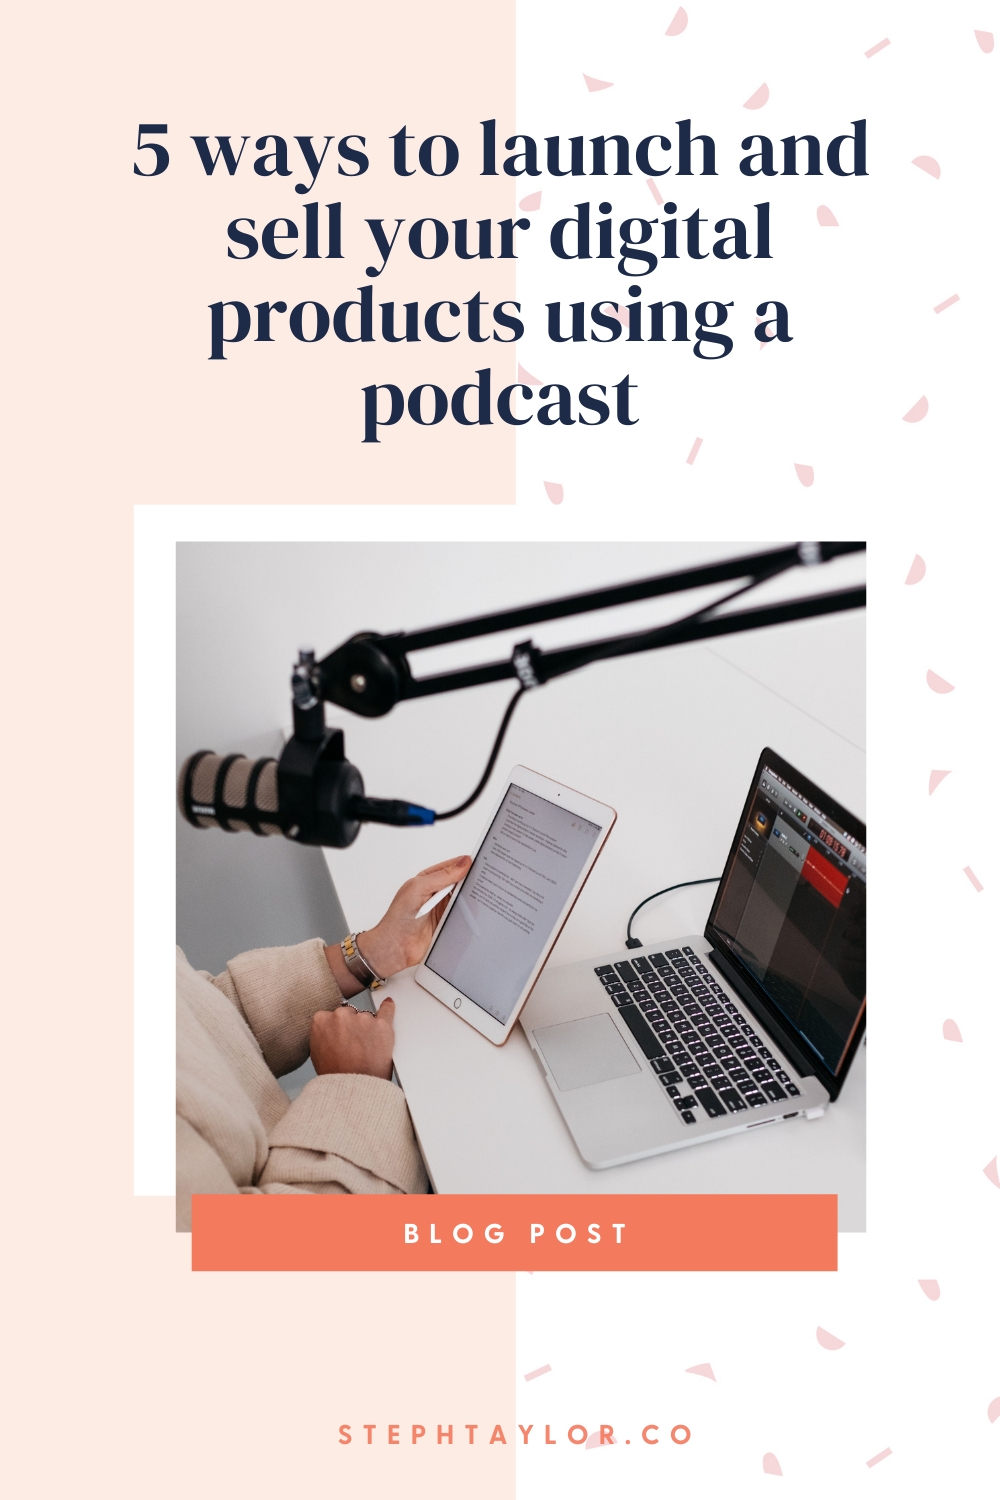 5 ways to launch and sell your digital products using a podcast